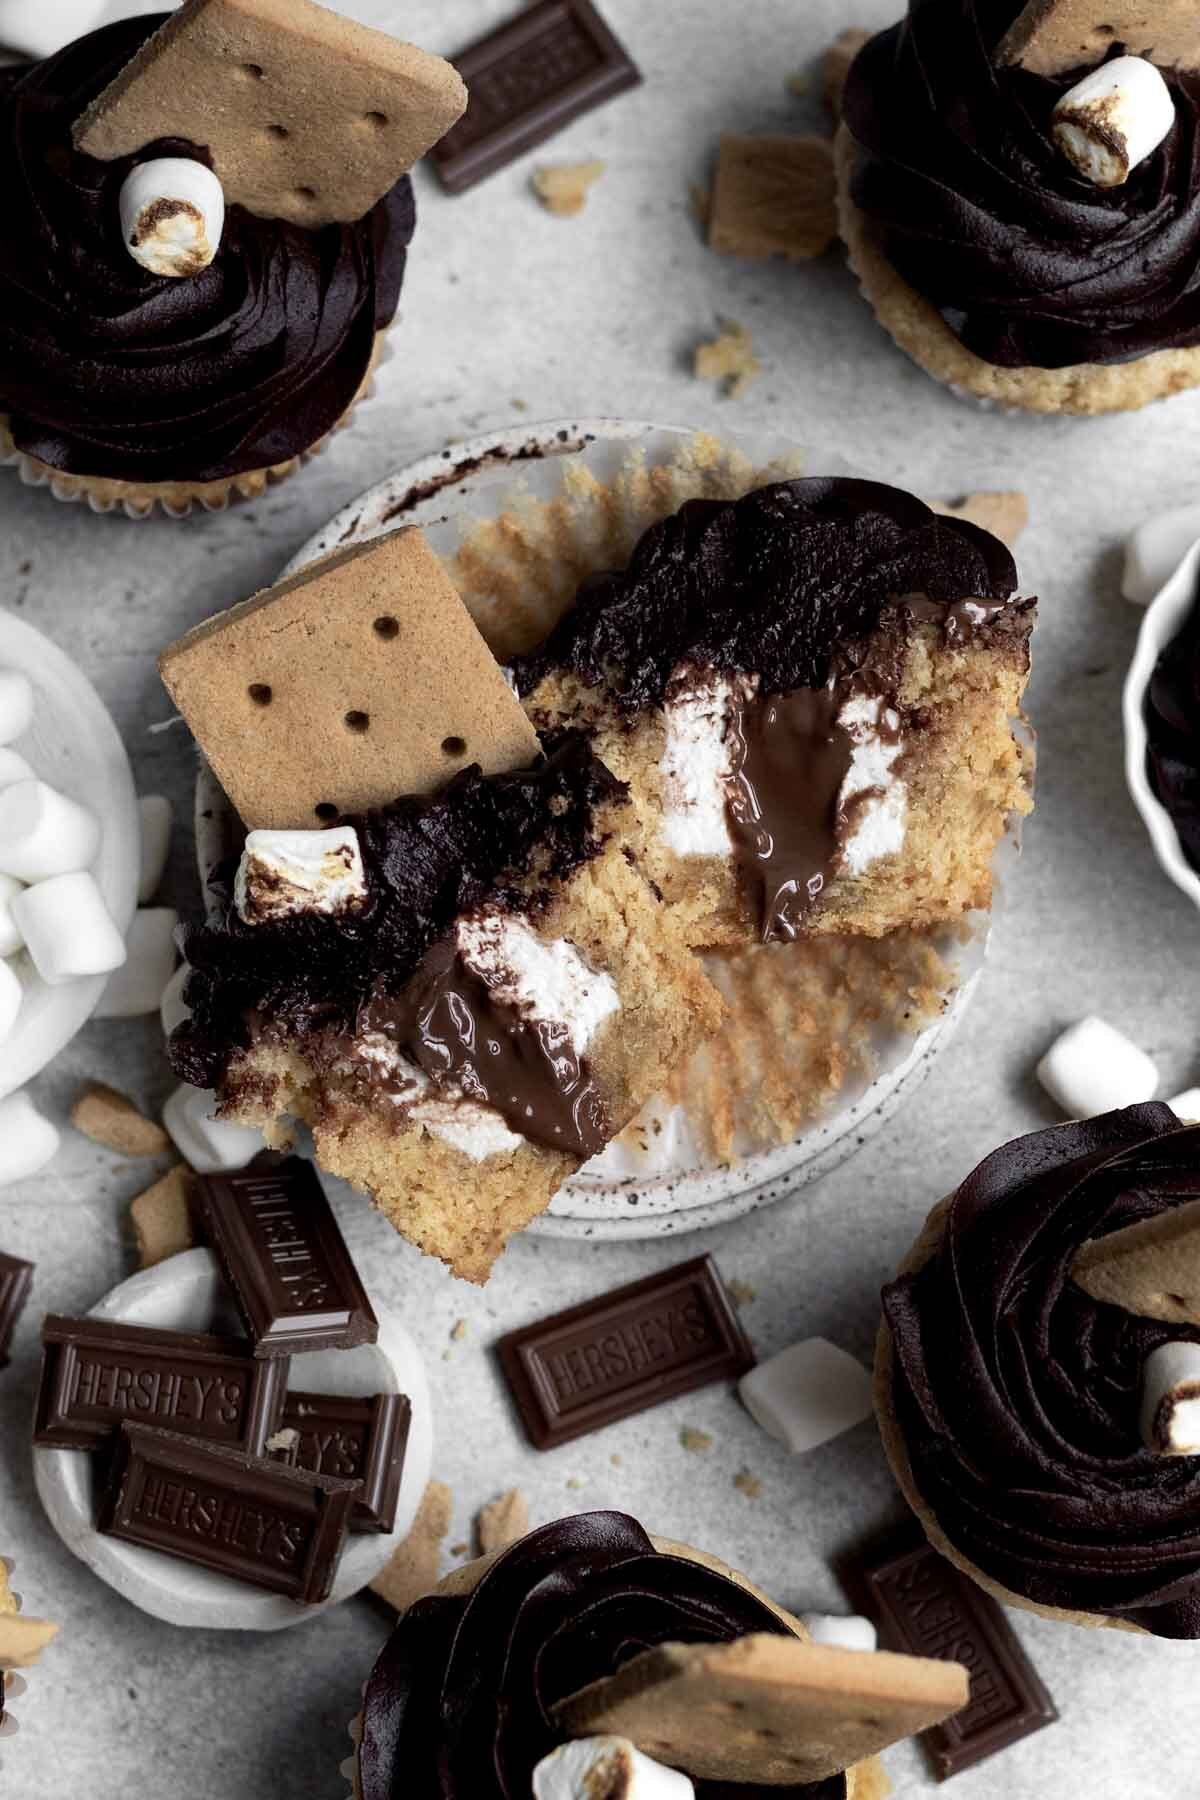 A divided S’mores cupcake oozing chocolate and warm marshmallow.